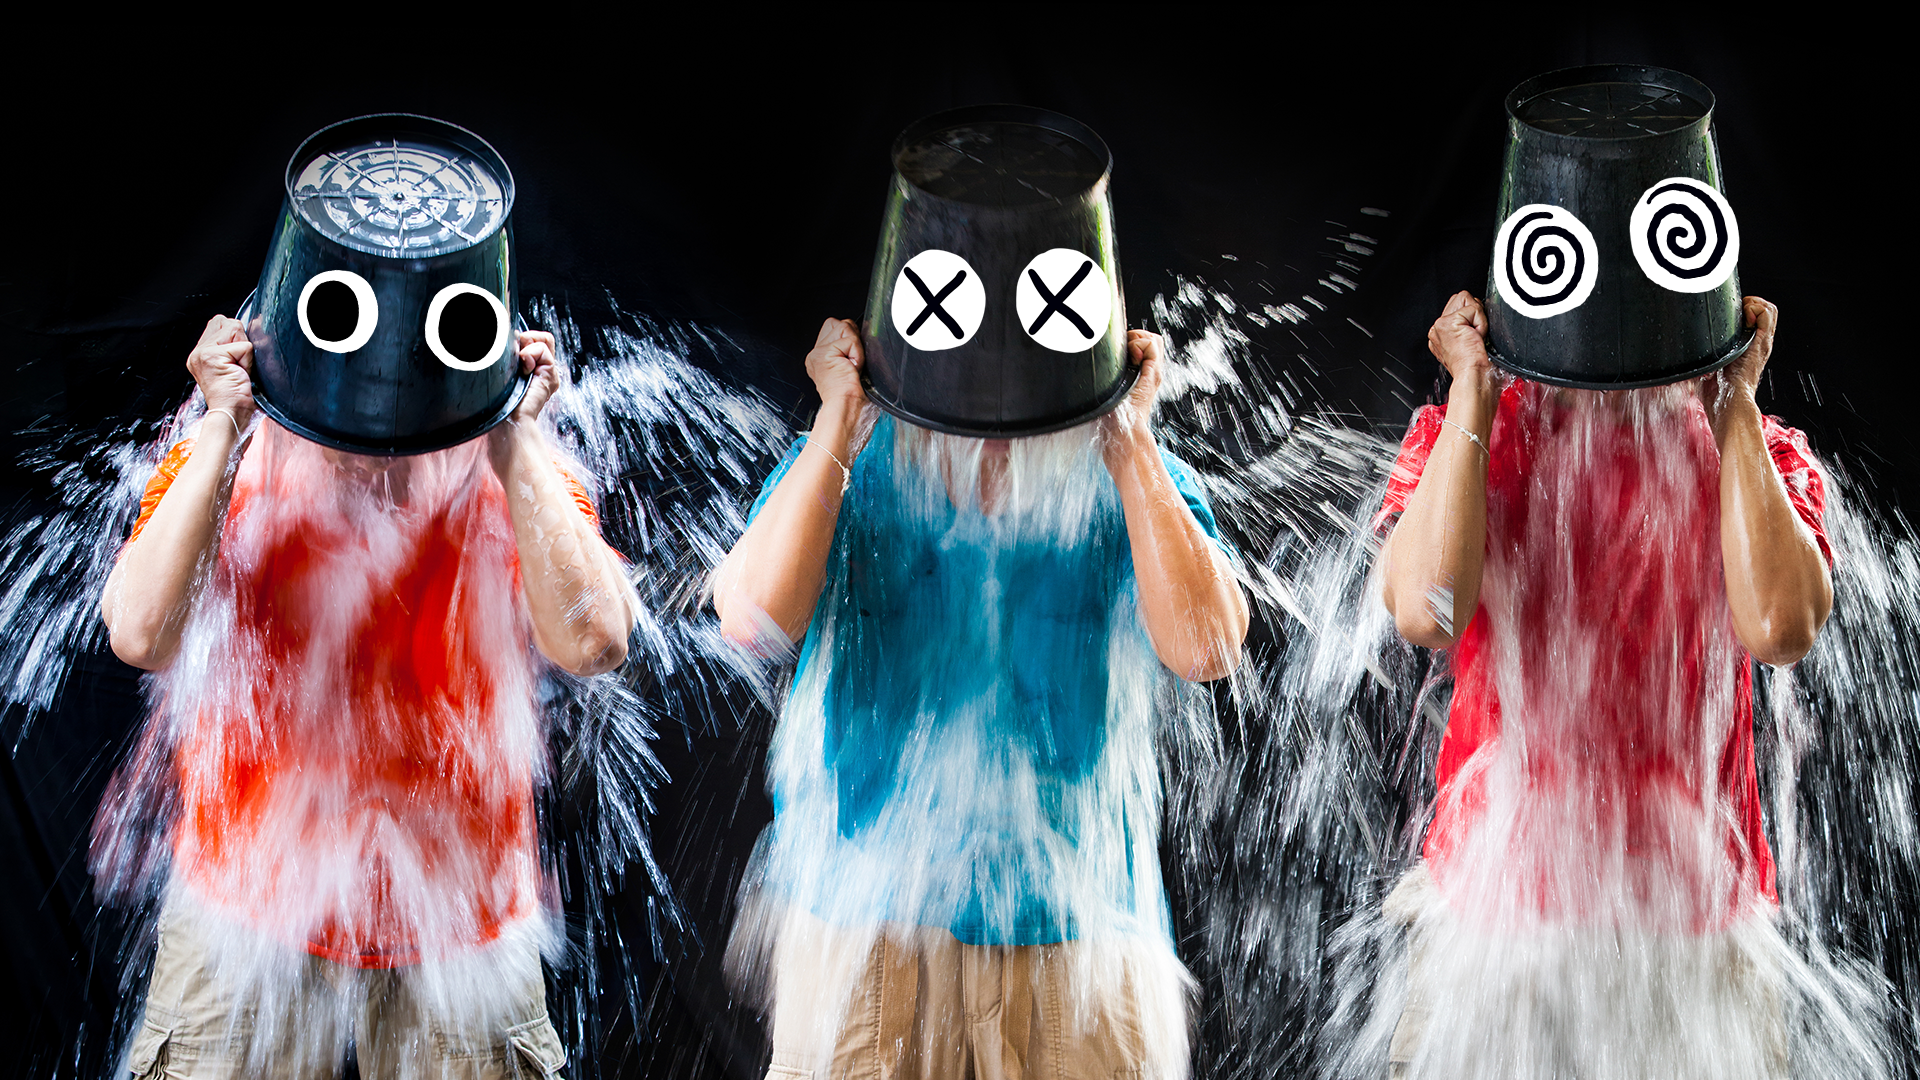 Three people pouring buckets of water over their heads